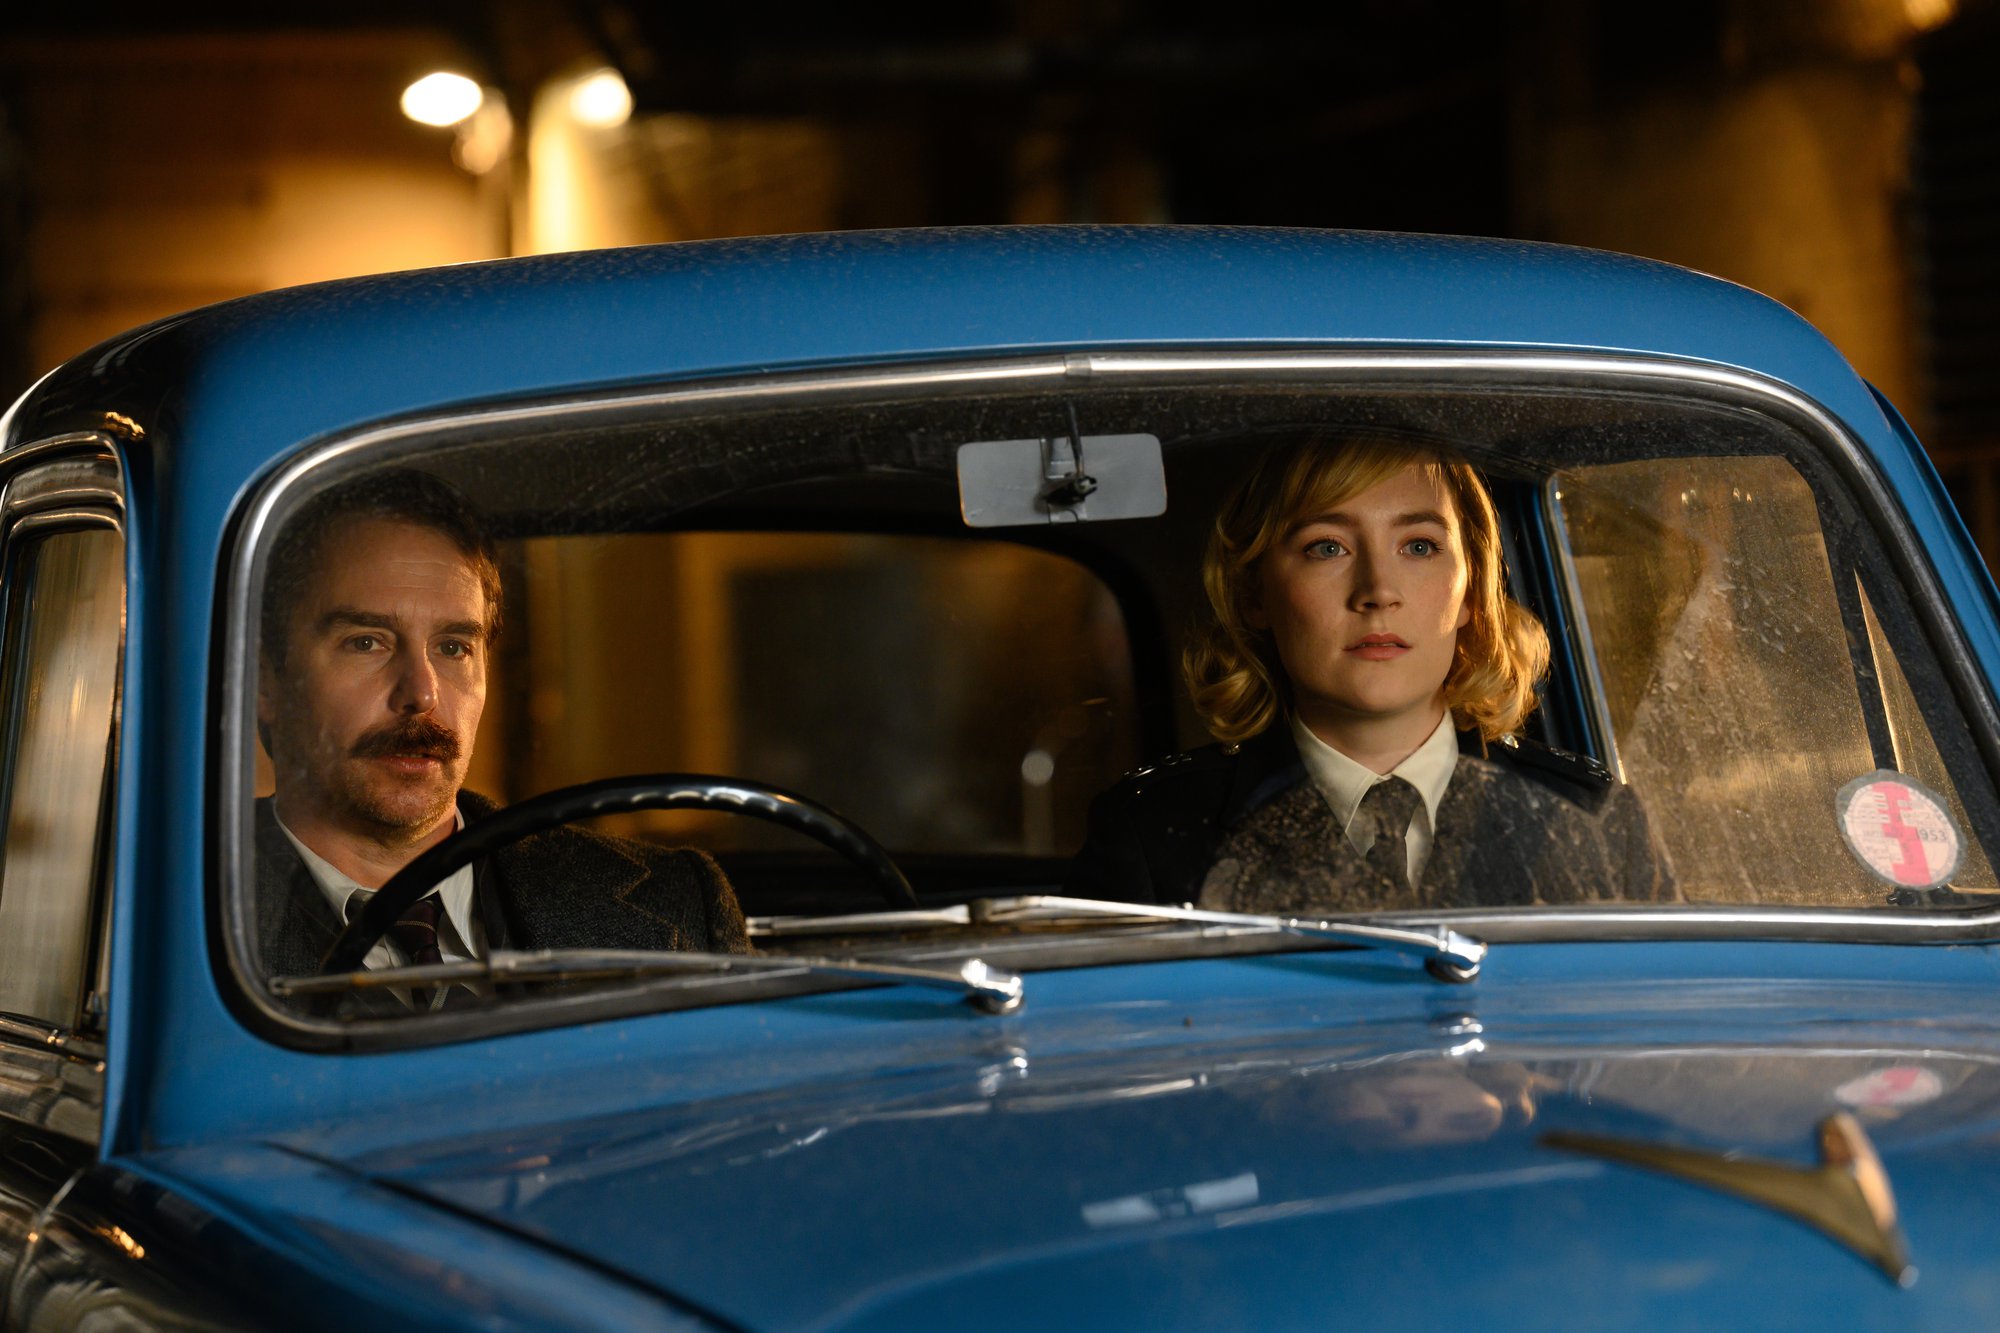  Sam Rockwell and Saoirse Ronan in the film SEE HOW THEY RUN. Photo by Parisa Taghizadeh. Courtesy of Searchlight Pictures. &copy; 2022 20th Century Studios All Rights Reserved 